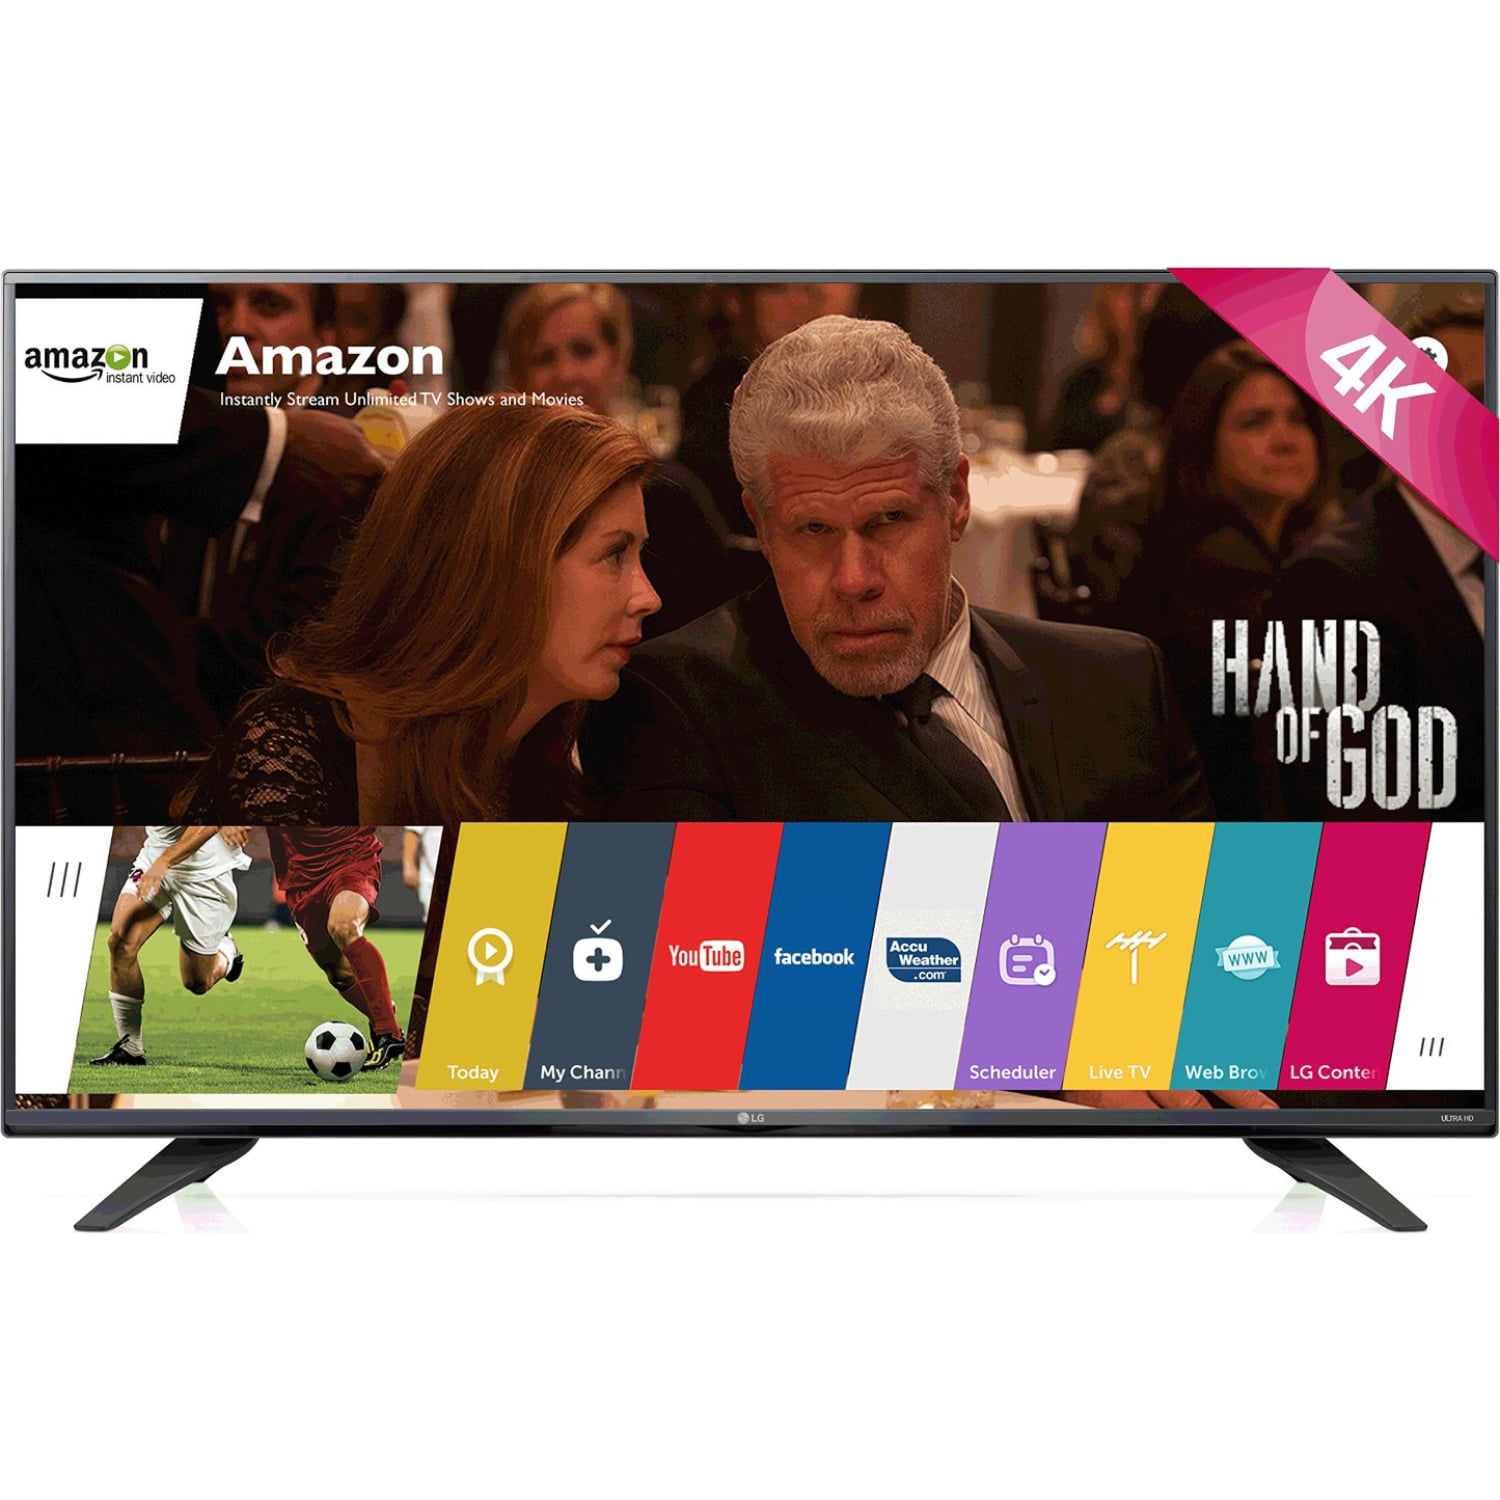 LG 60UF7700 - 60-inch 240Hz 2160p 4K Smart LED UHD TV with WebOS - 0